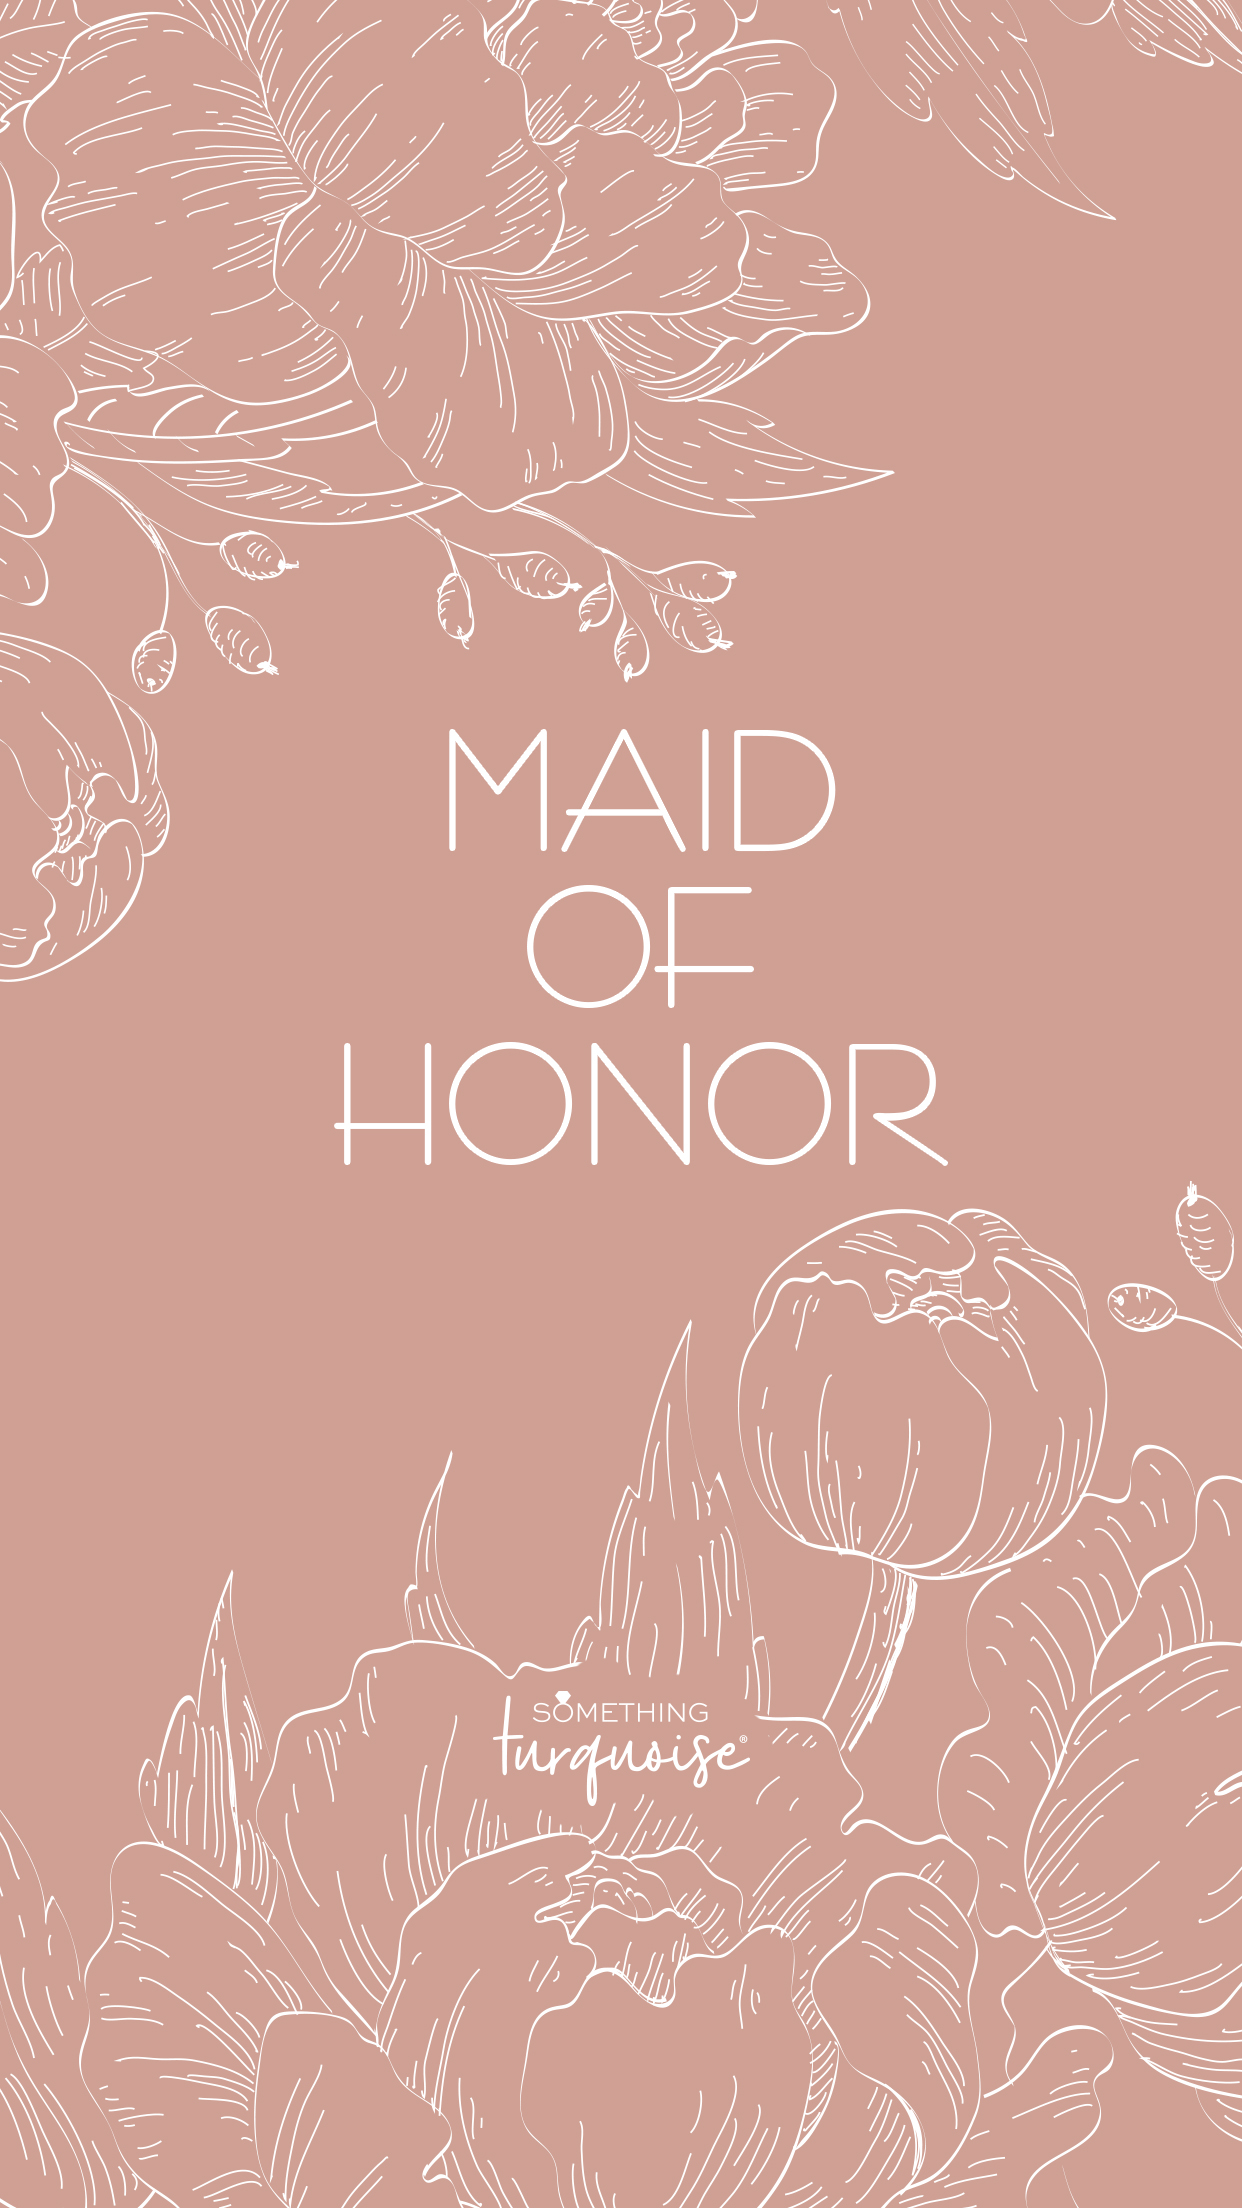 Free floral phone wallpaper for the Maid of Honor